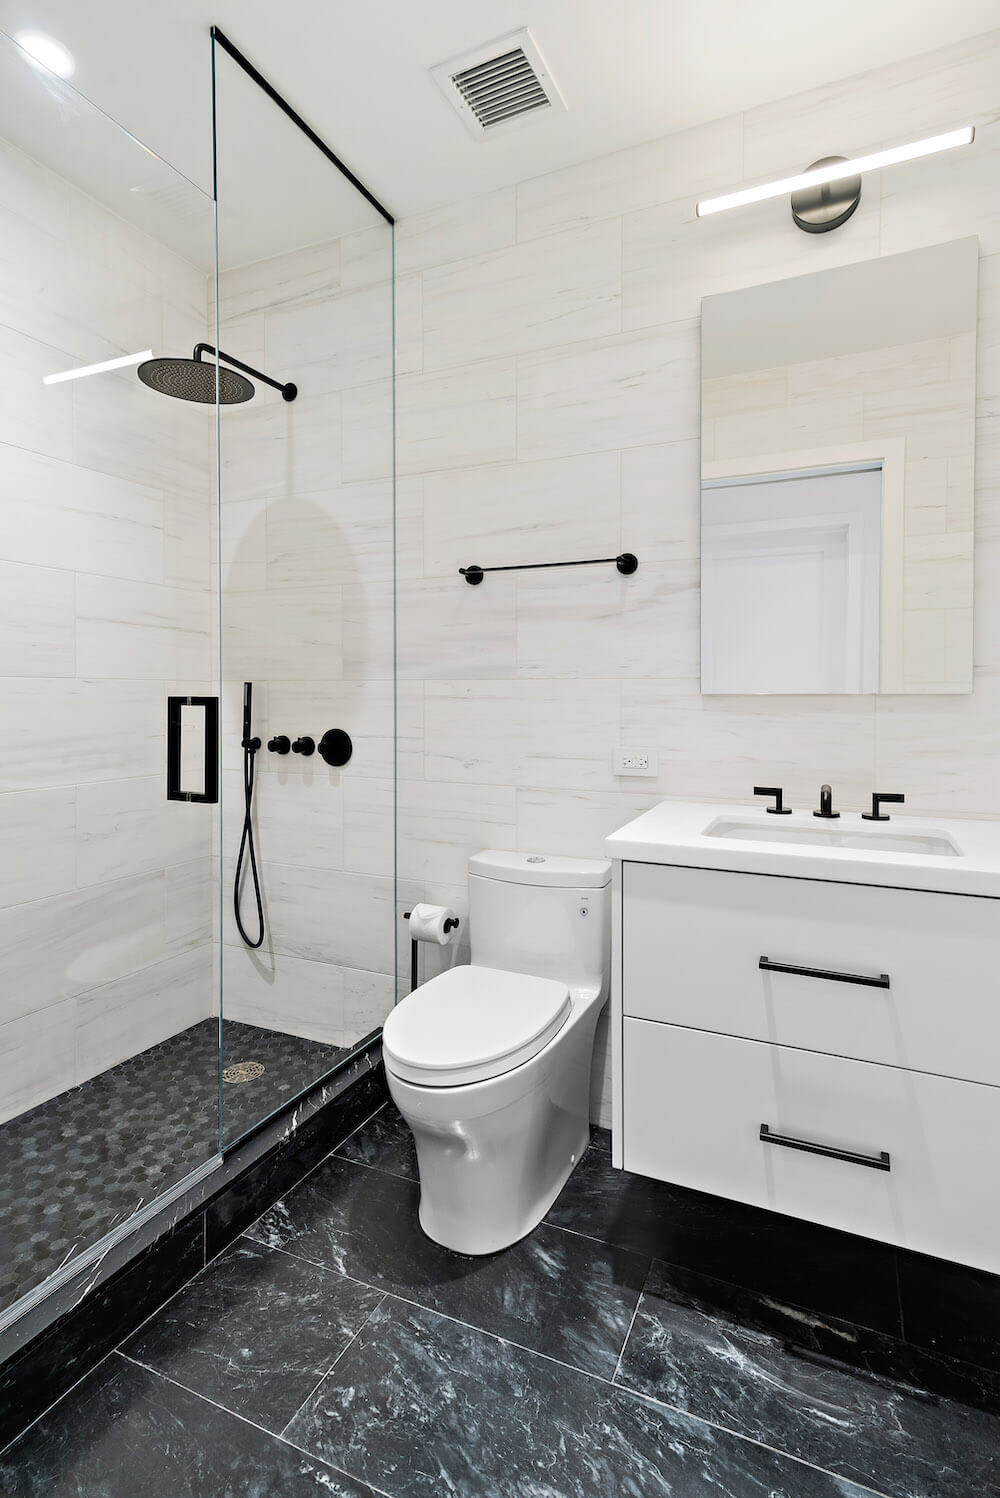 Small white bathroom with glass separator for walk-in shower along with floating vanity over black floor tile